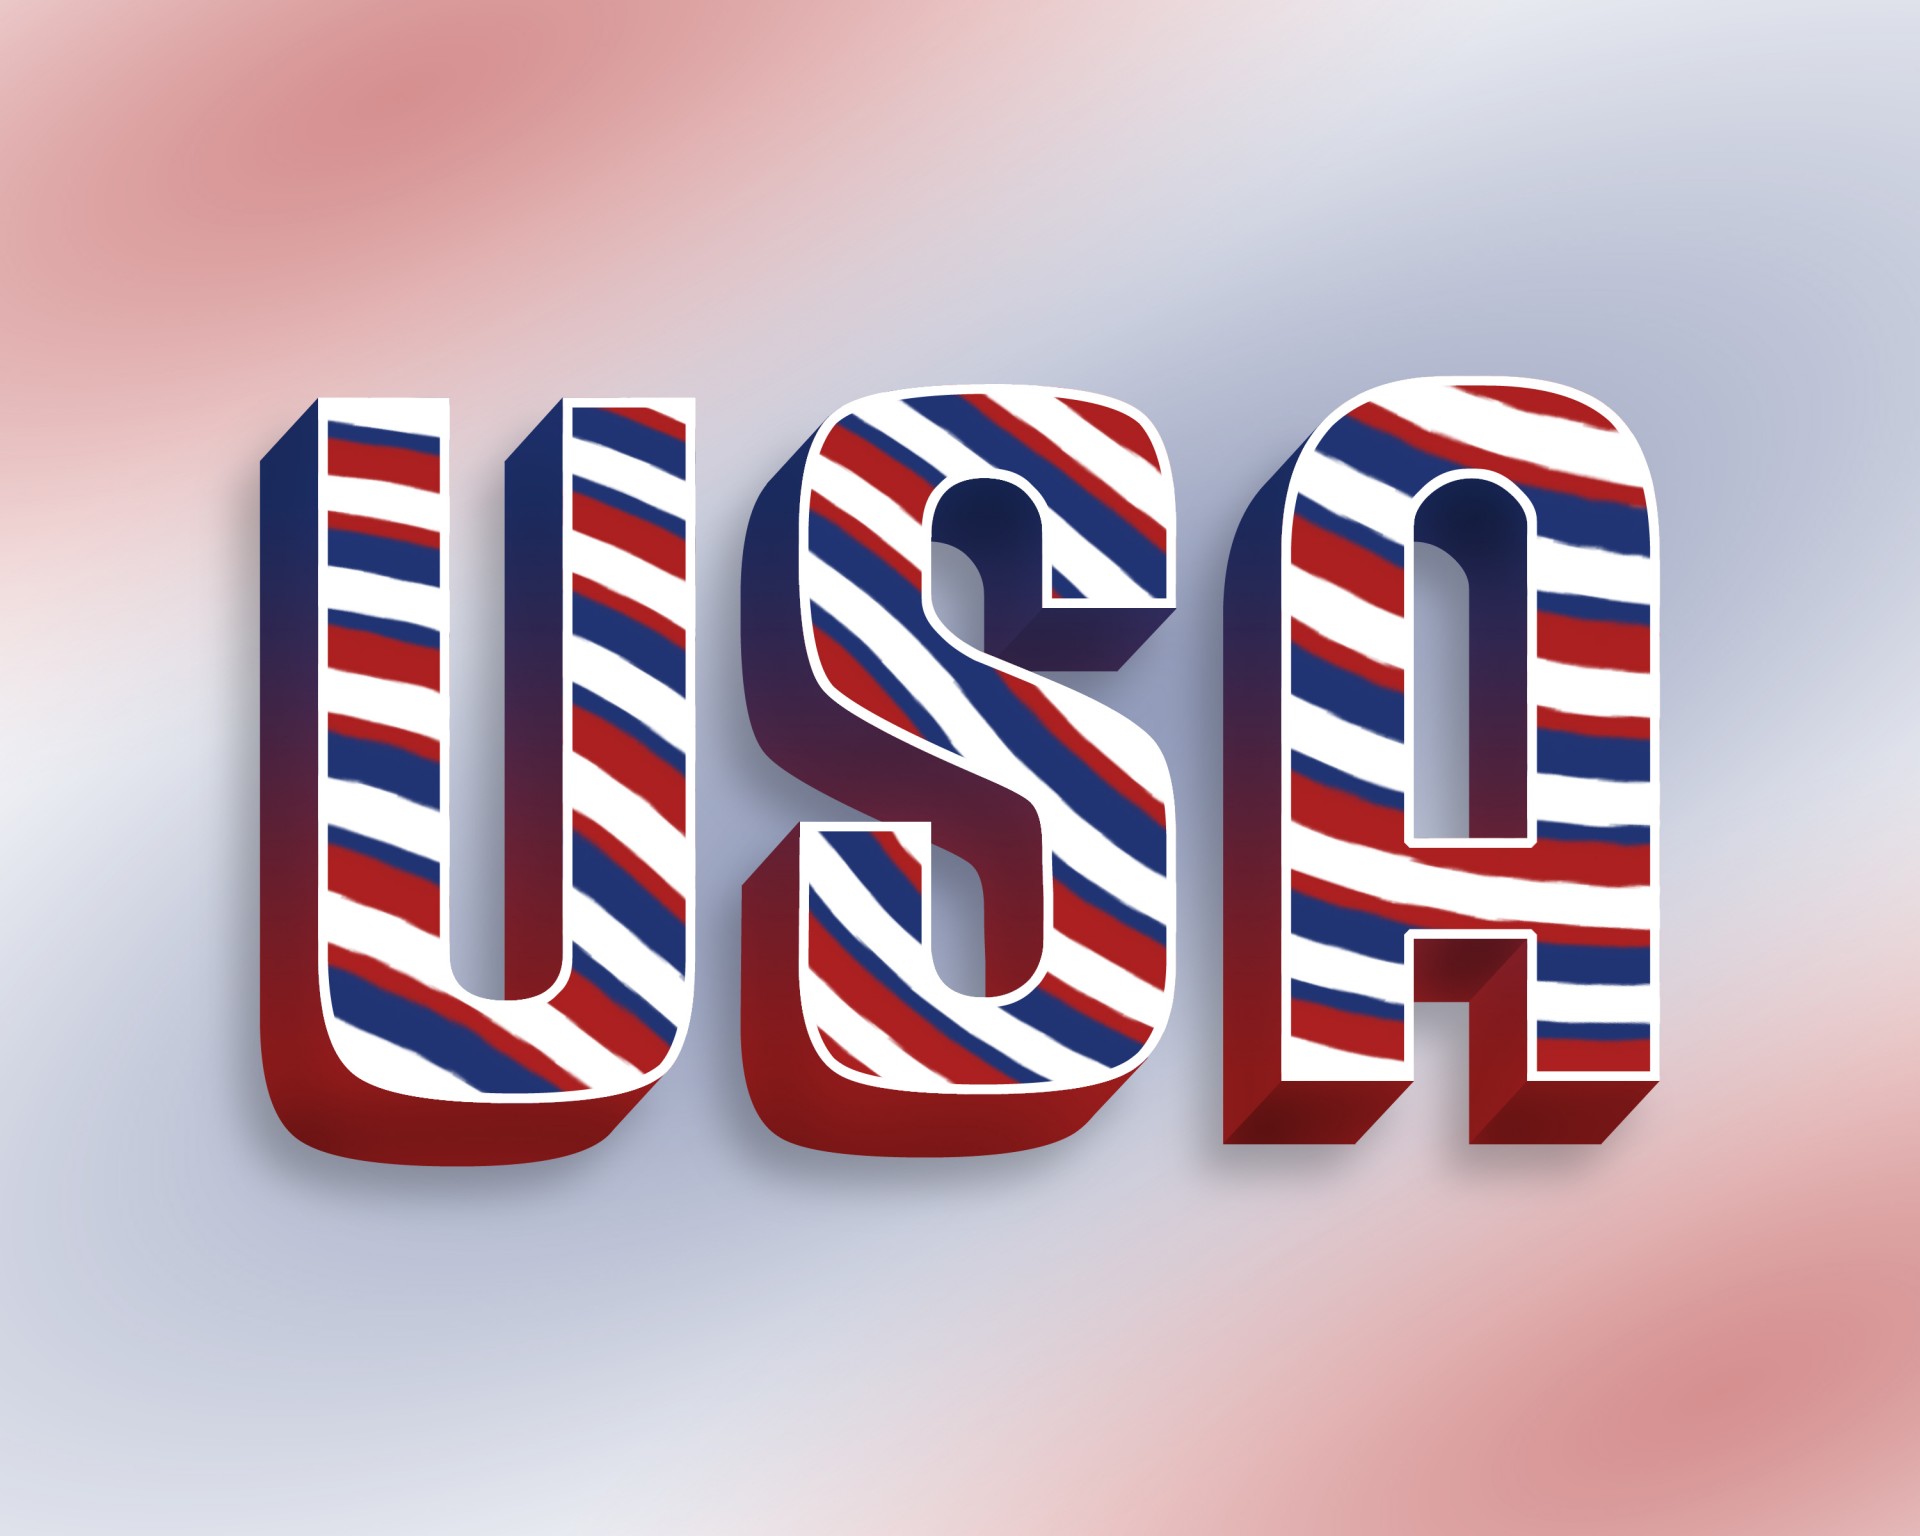 USA 3d striped text on red white blue background - Your premium download is greatly appreciated – enjoy!